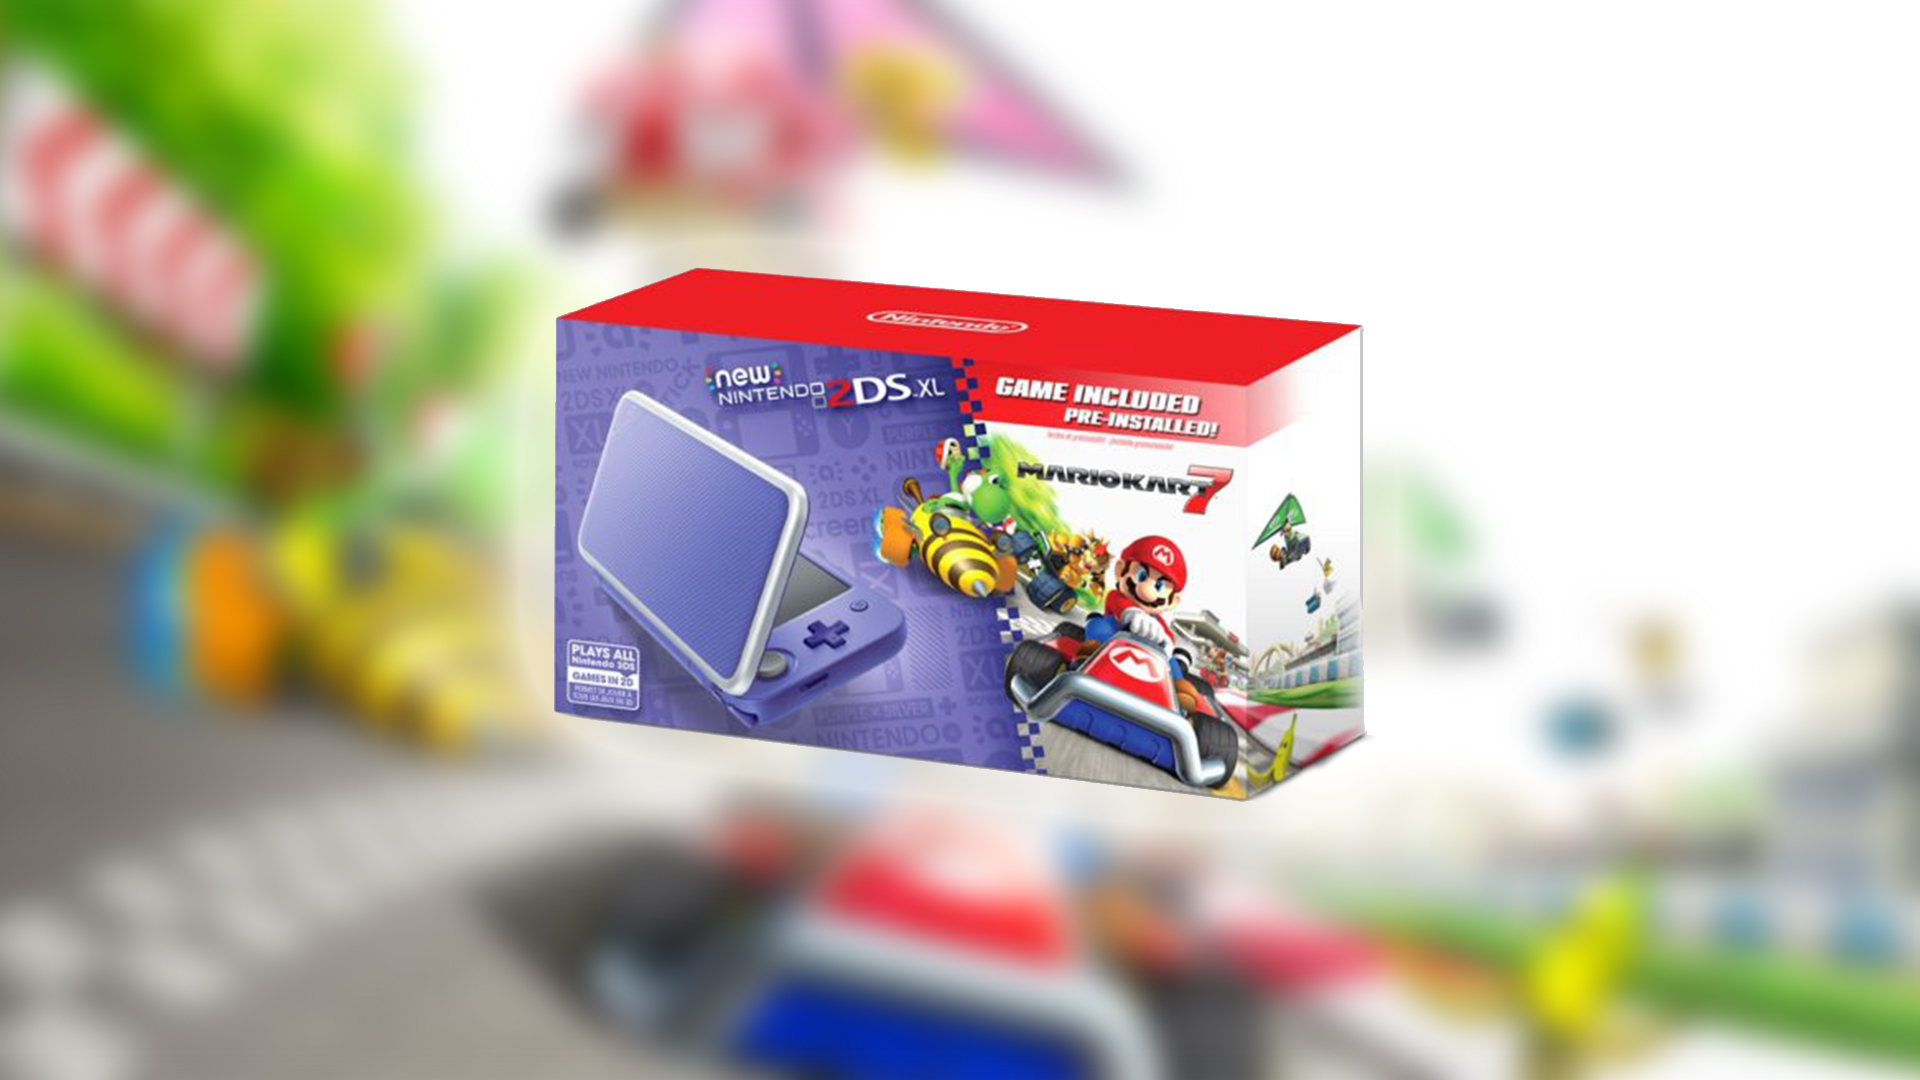 Purple Silver New Nintendo 2ds Xl Announced Comes Bundled With Mario Kart 7 Nintendo Wire